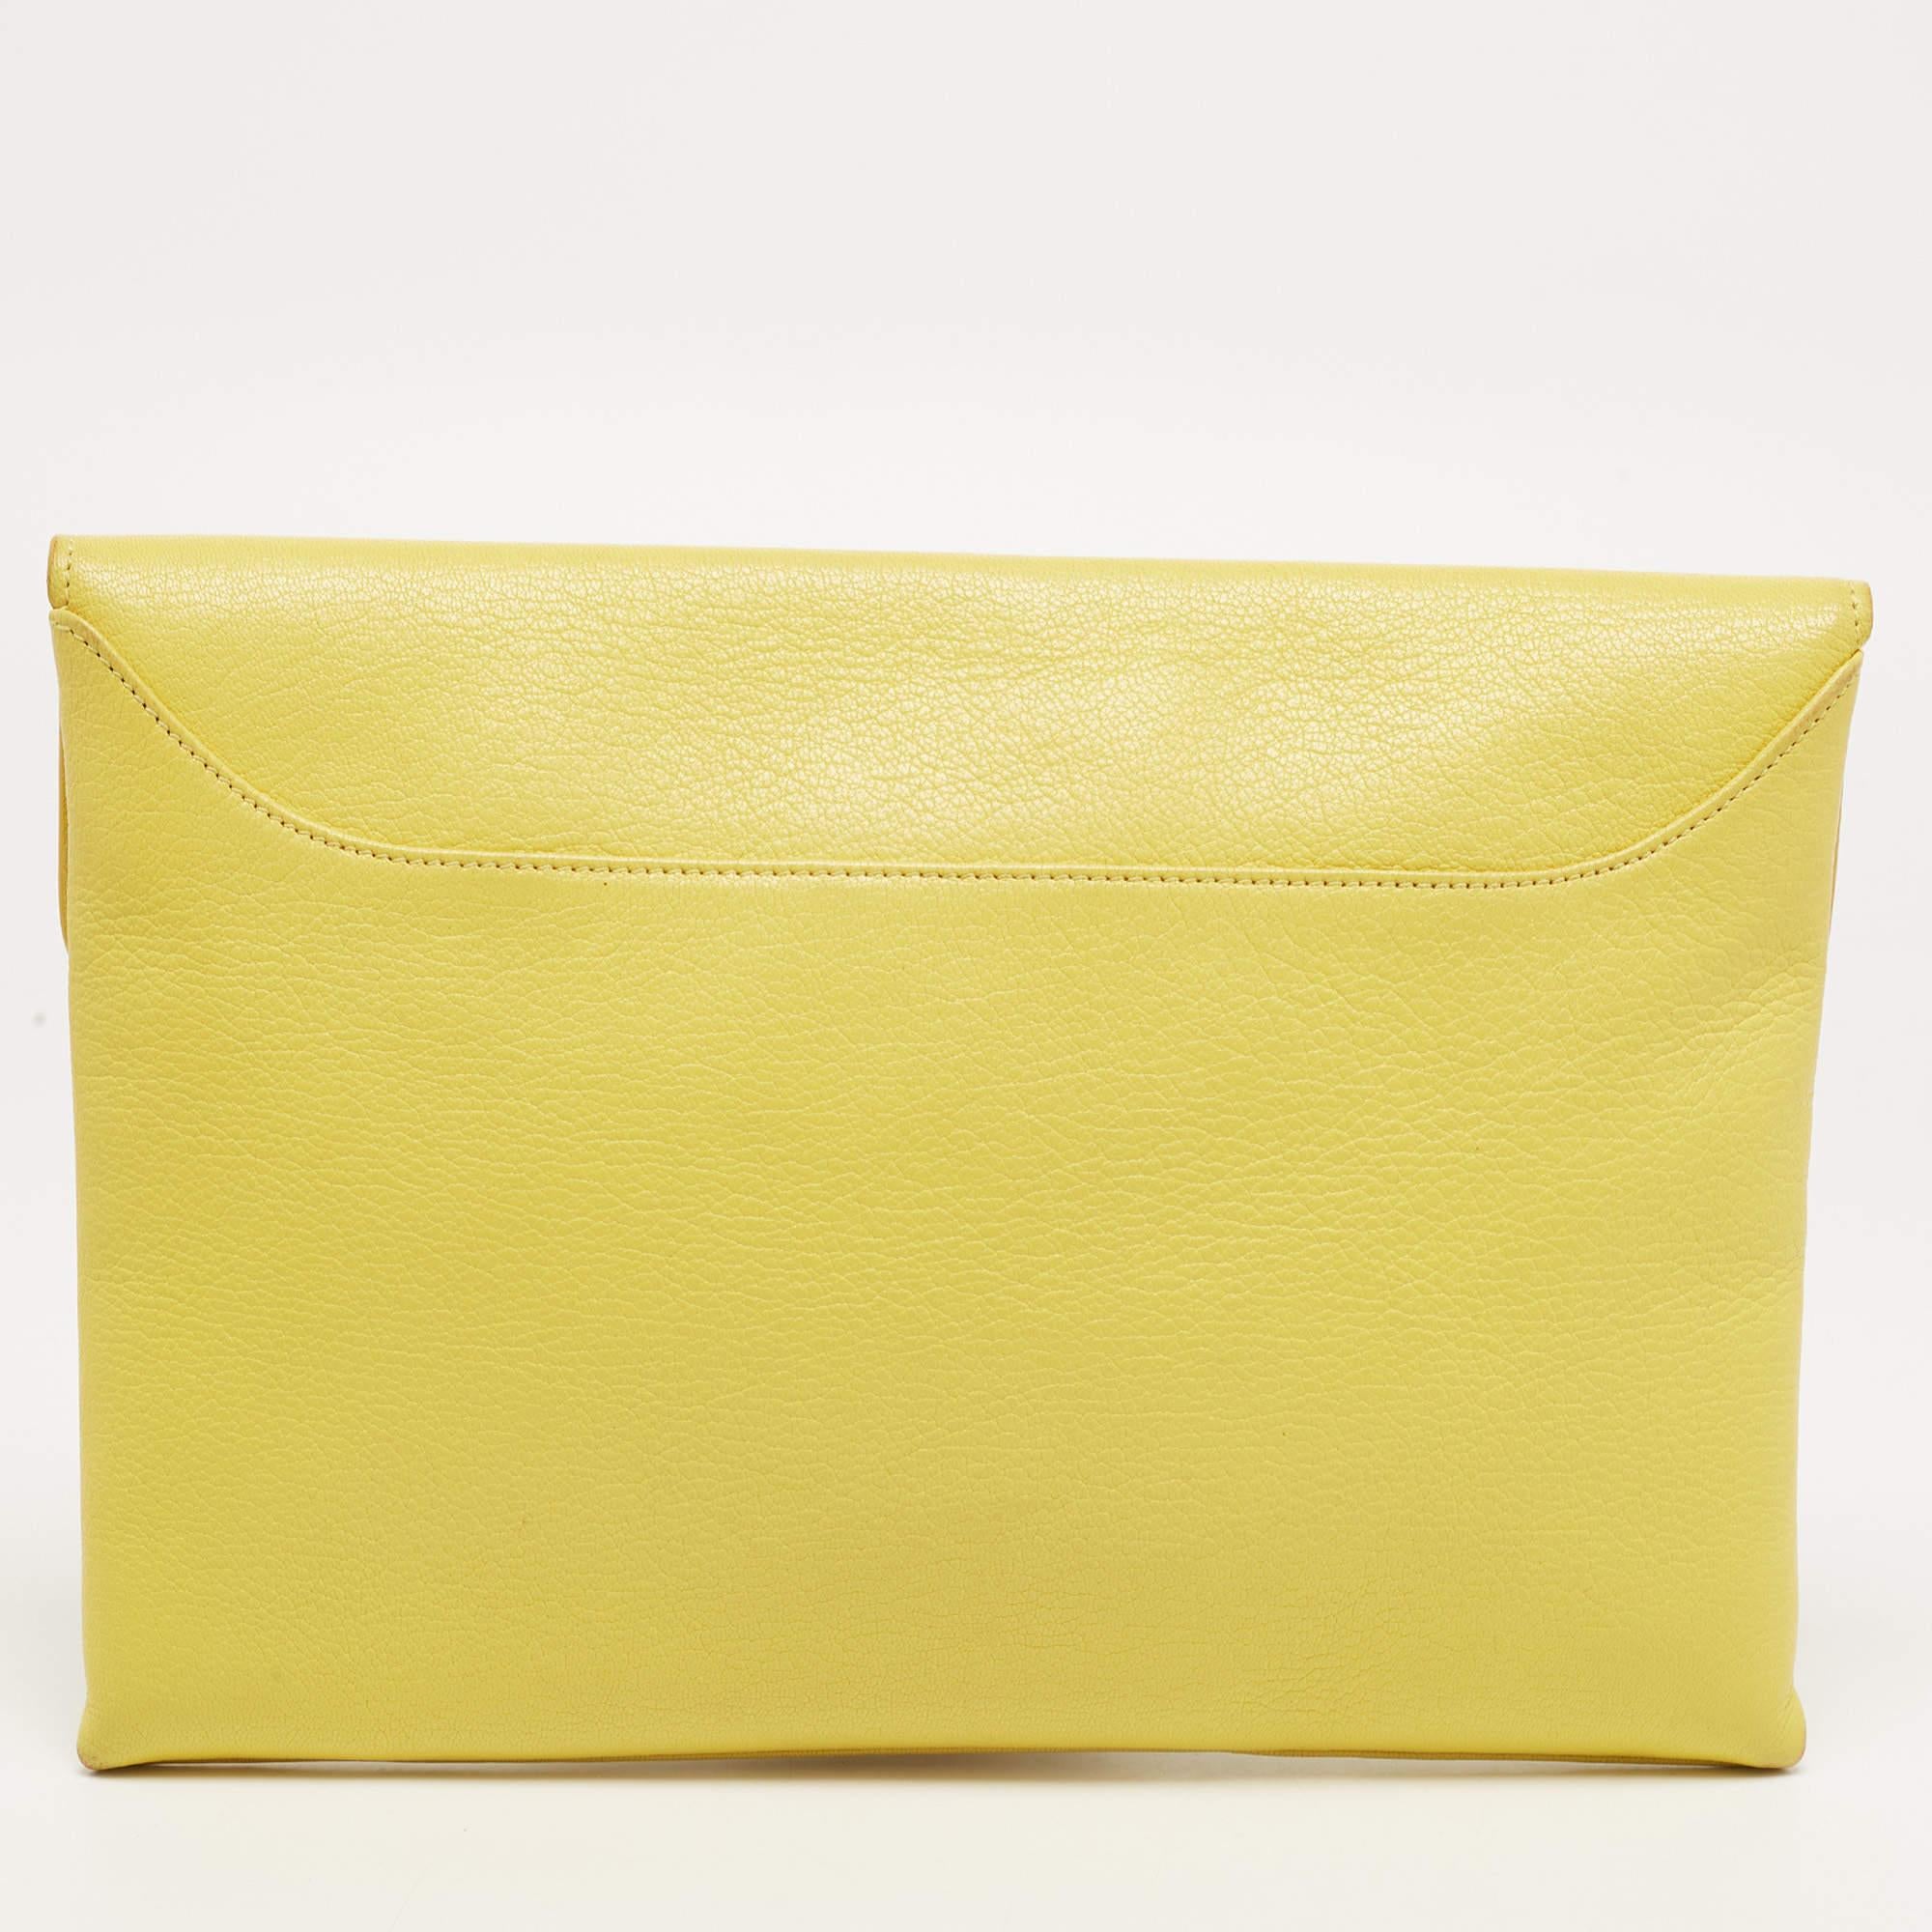 The elegant and feminine design of this beautiful Givenchy Medium Envelope Antigona clutch makes it perfect for the spring and summer seasons. Crafted in lemon yellow leather, this clutch will add a pop of colour to your day time looks and look